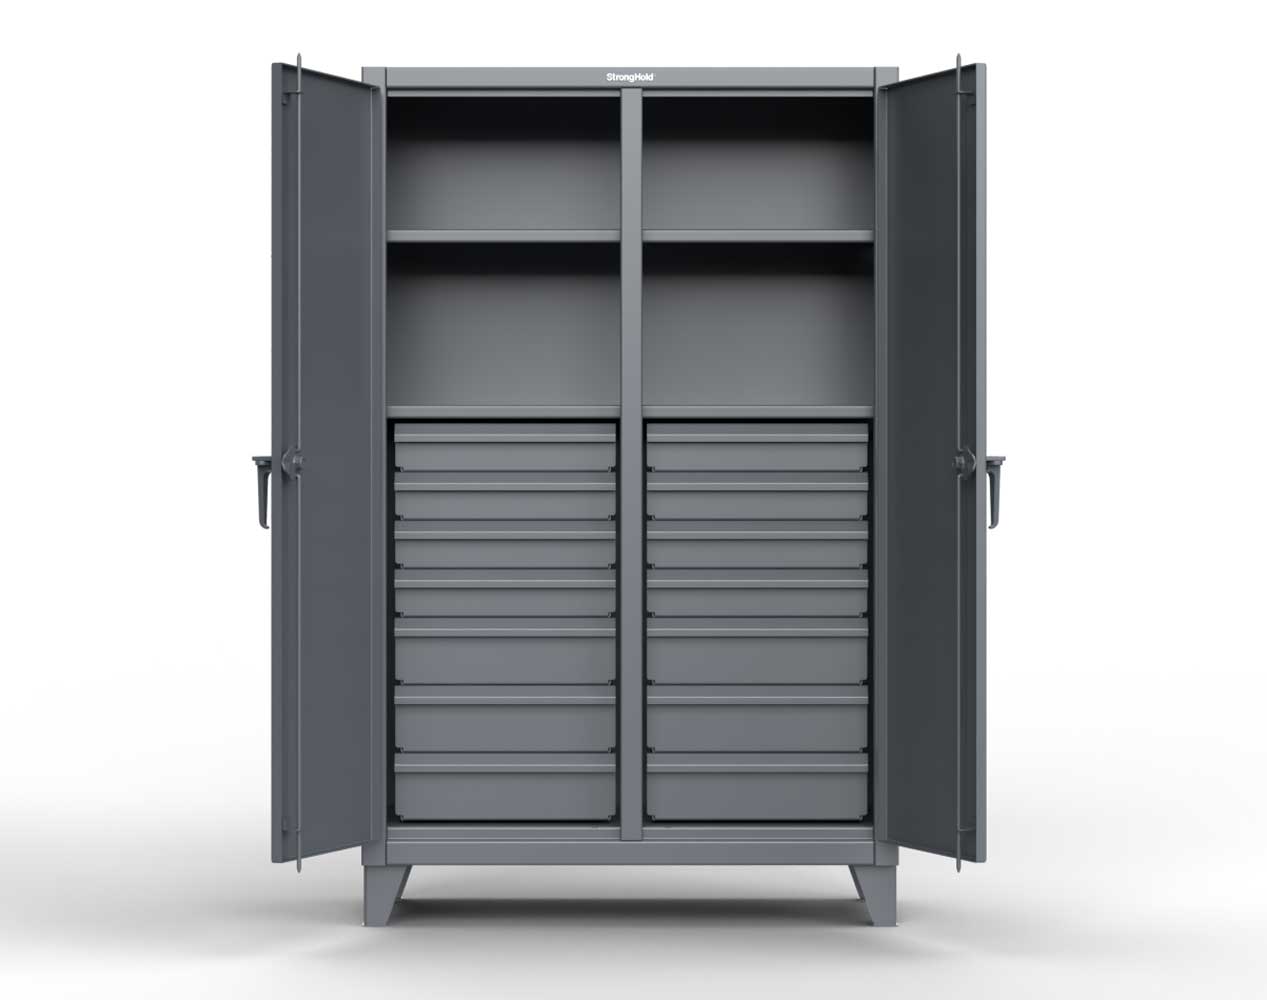 Extreme Duty 12 GA Double Shift Cabinet with 16 Drawers, 2 Shelves - 72 In. W x 24 In. D x 78 In. H